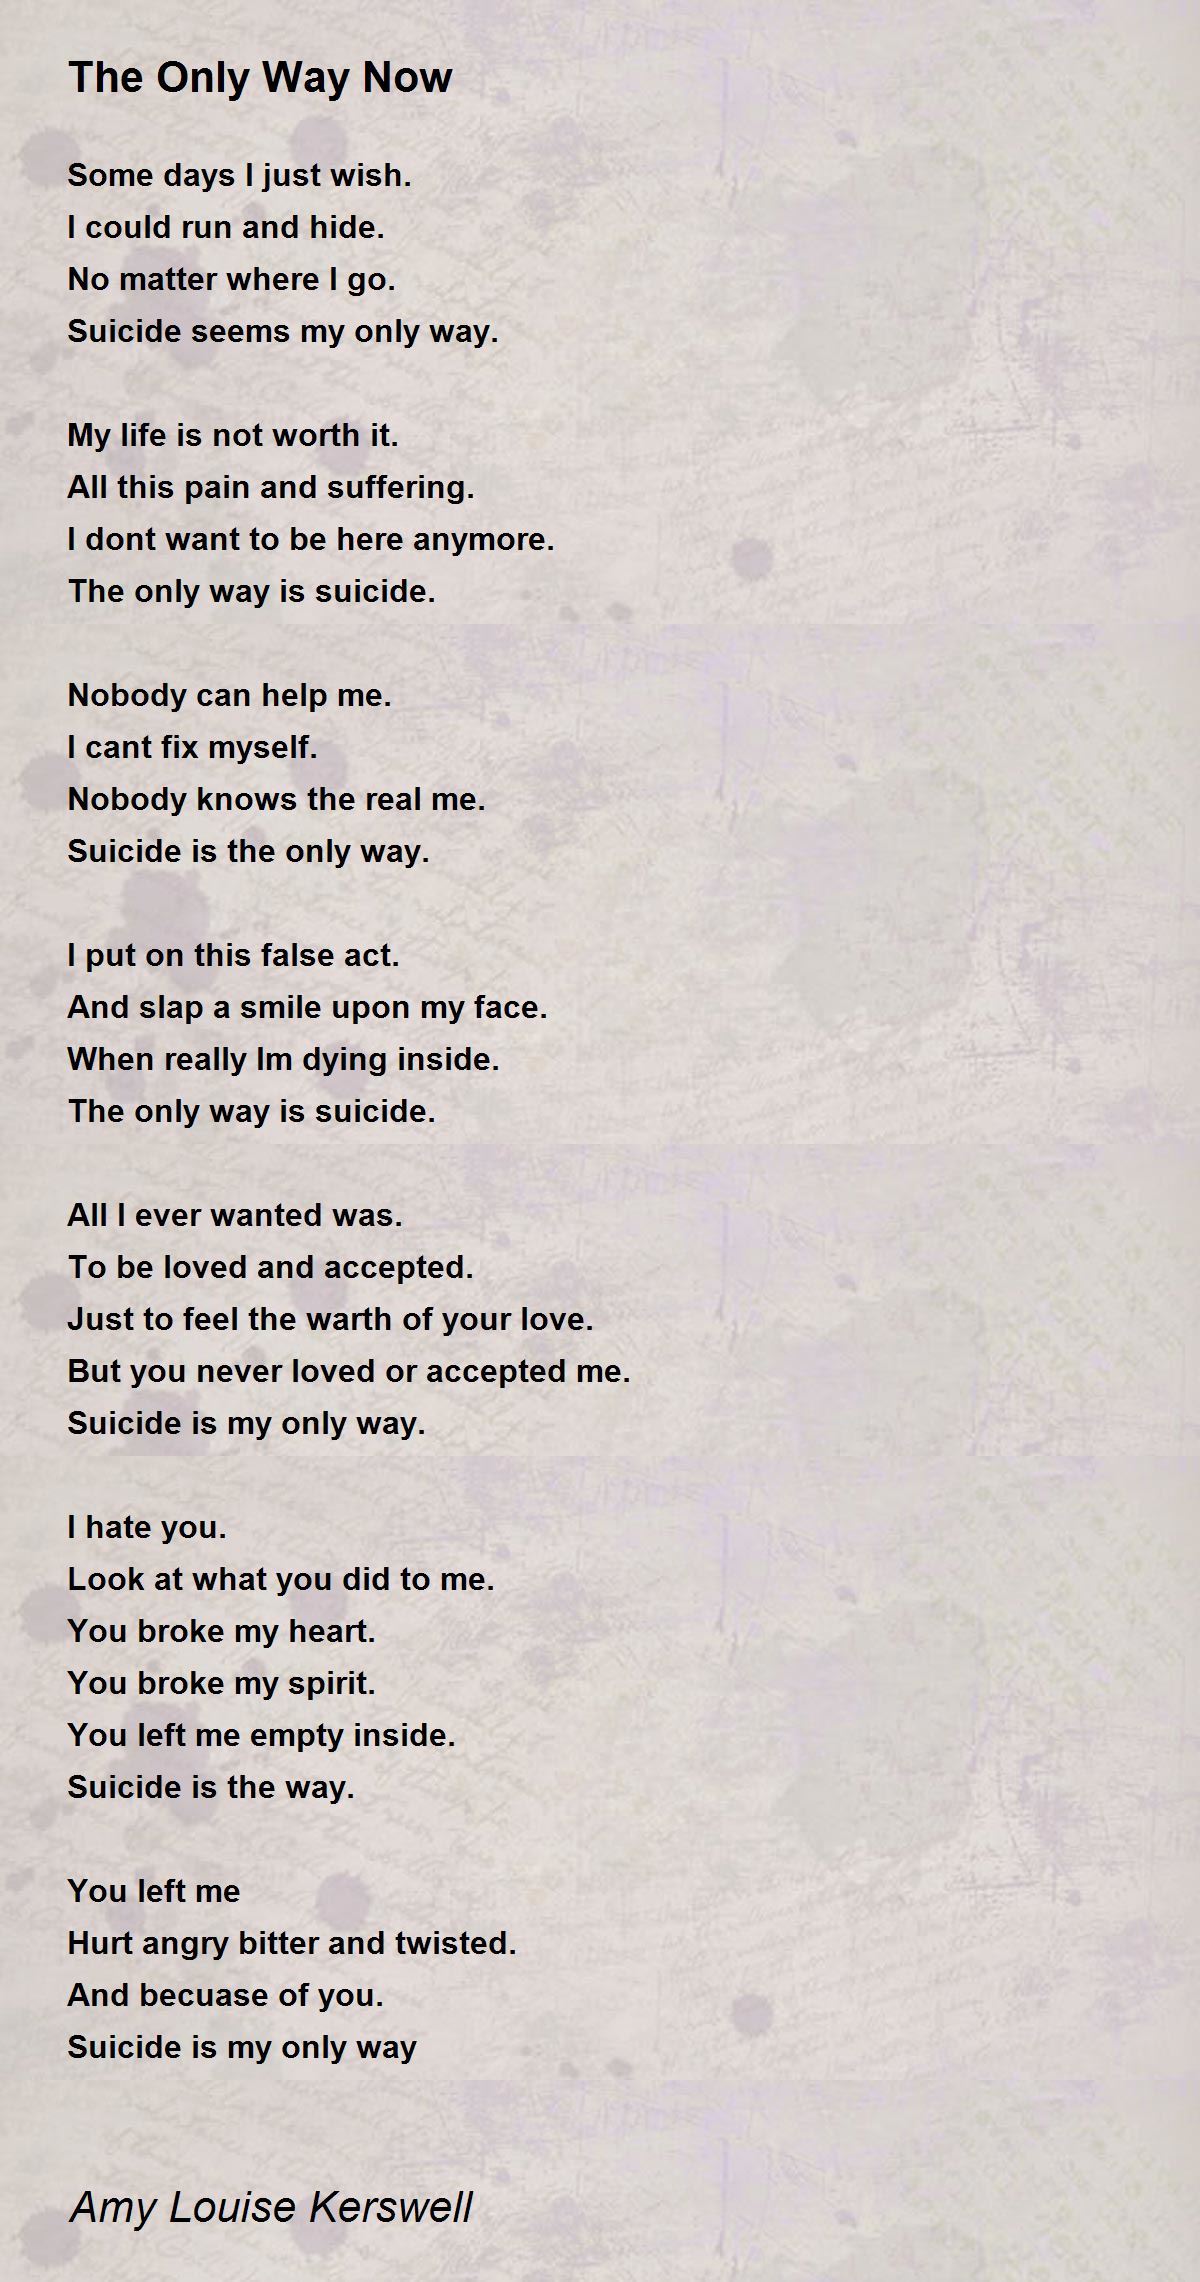 The Only Way Now - The Only Way Now Poem by Amy Louise Kerswell